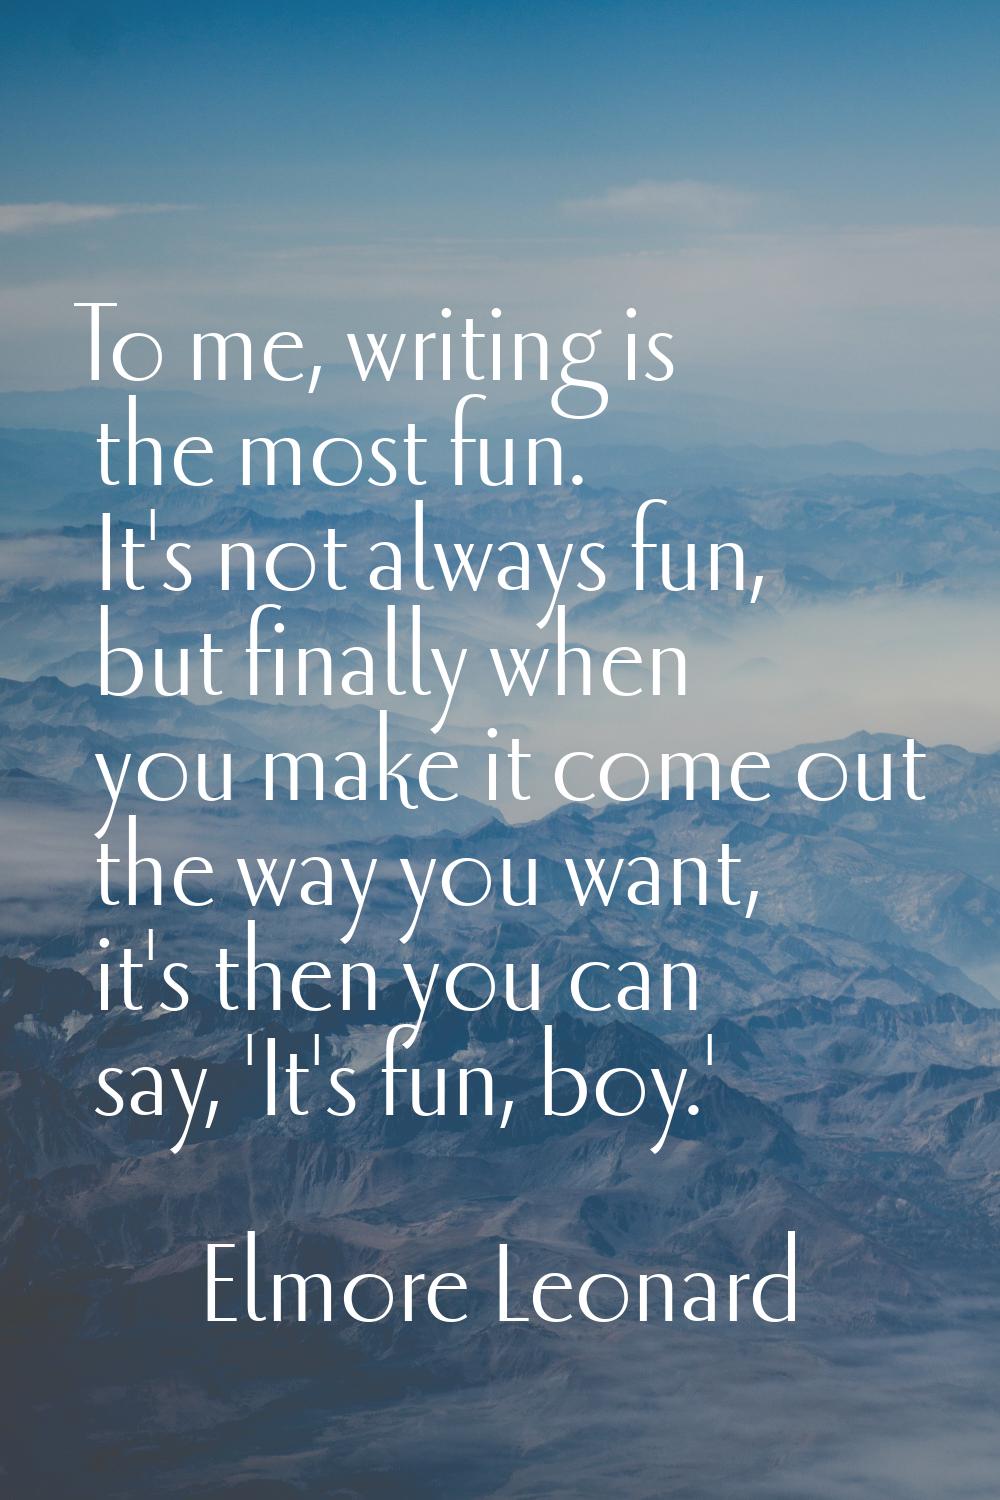 To me, writing is the most fun. It's not always fun, but finally when you make it come out the way 